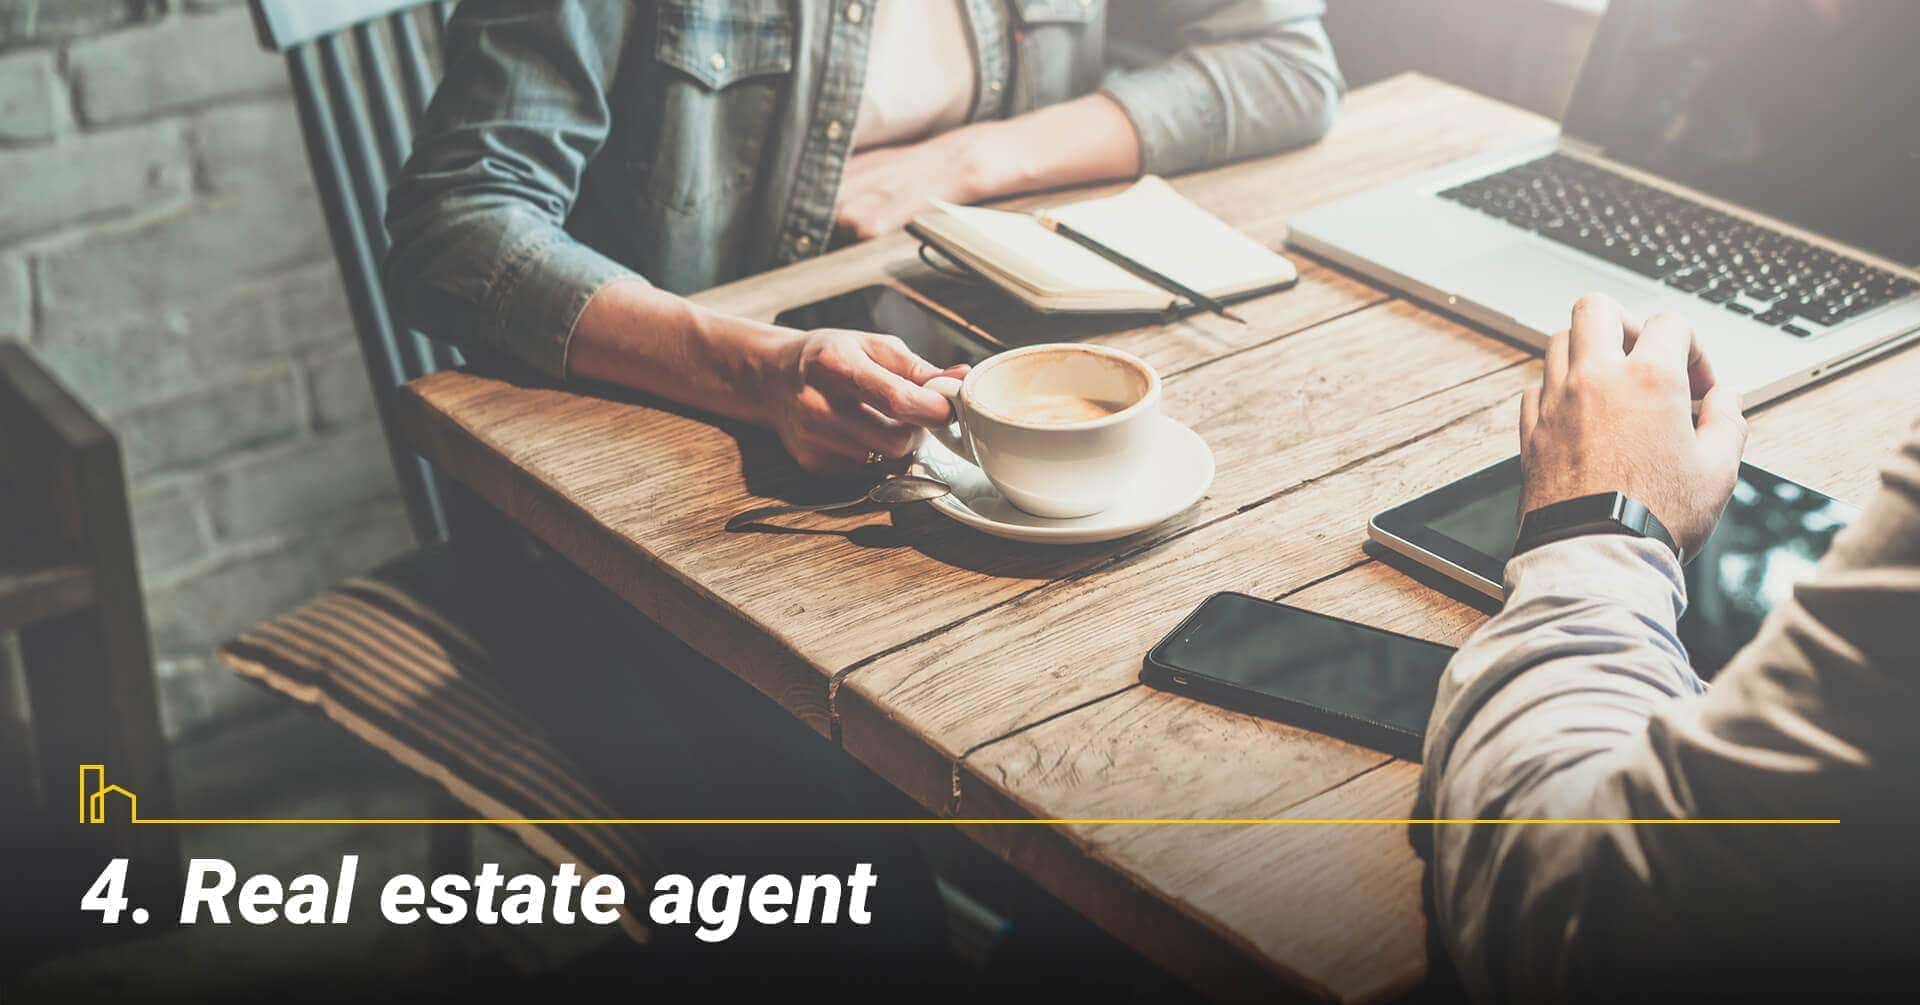 Real estate agent, talk with your agent